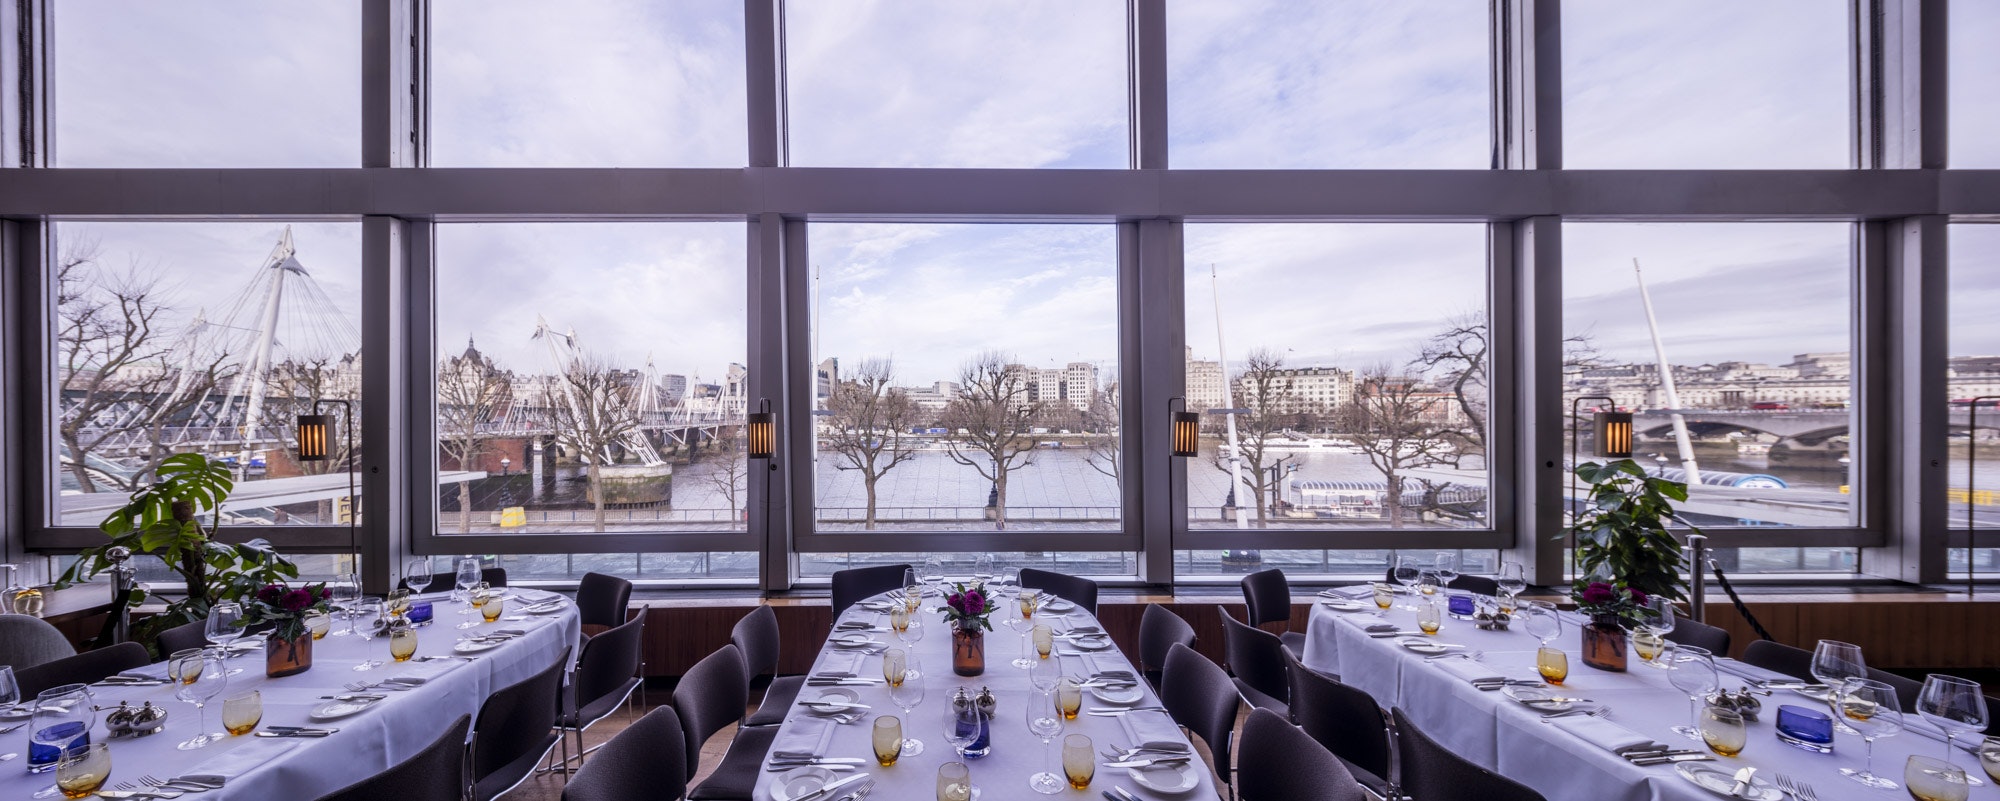 Private Dining Rooms Venues in East London - Skylon